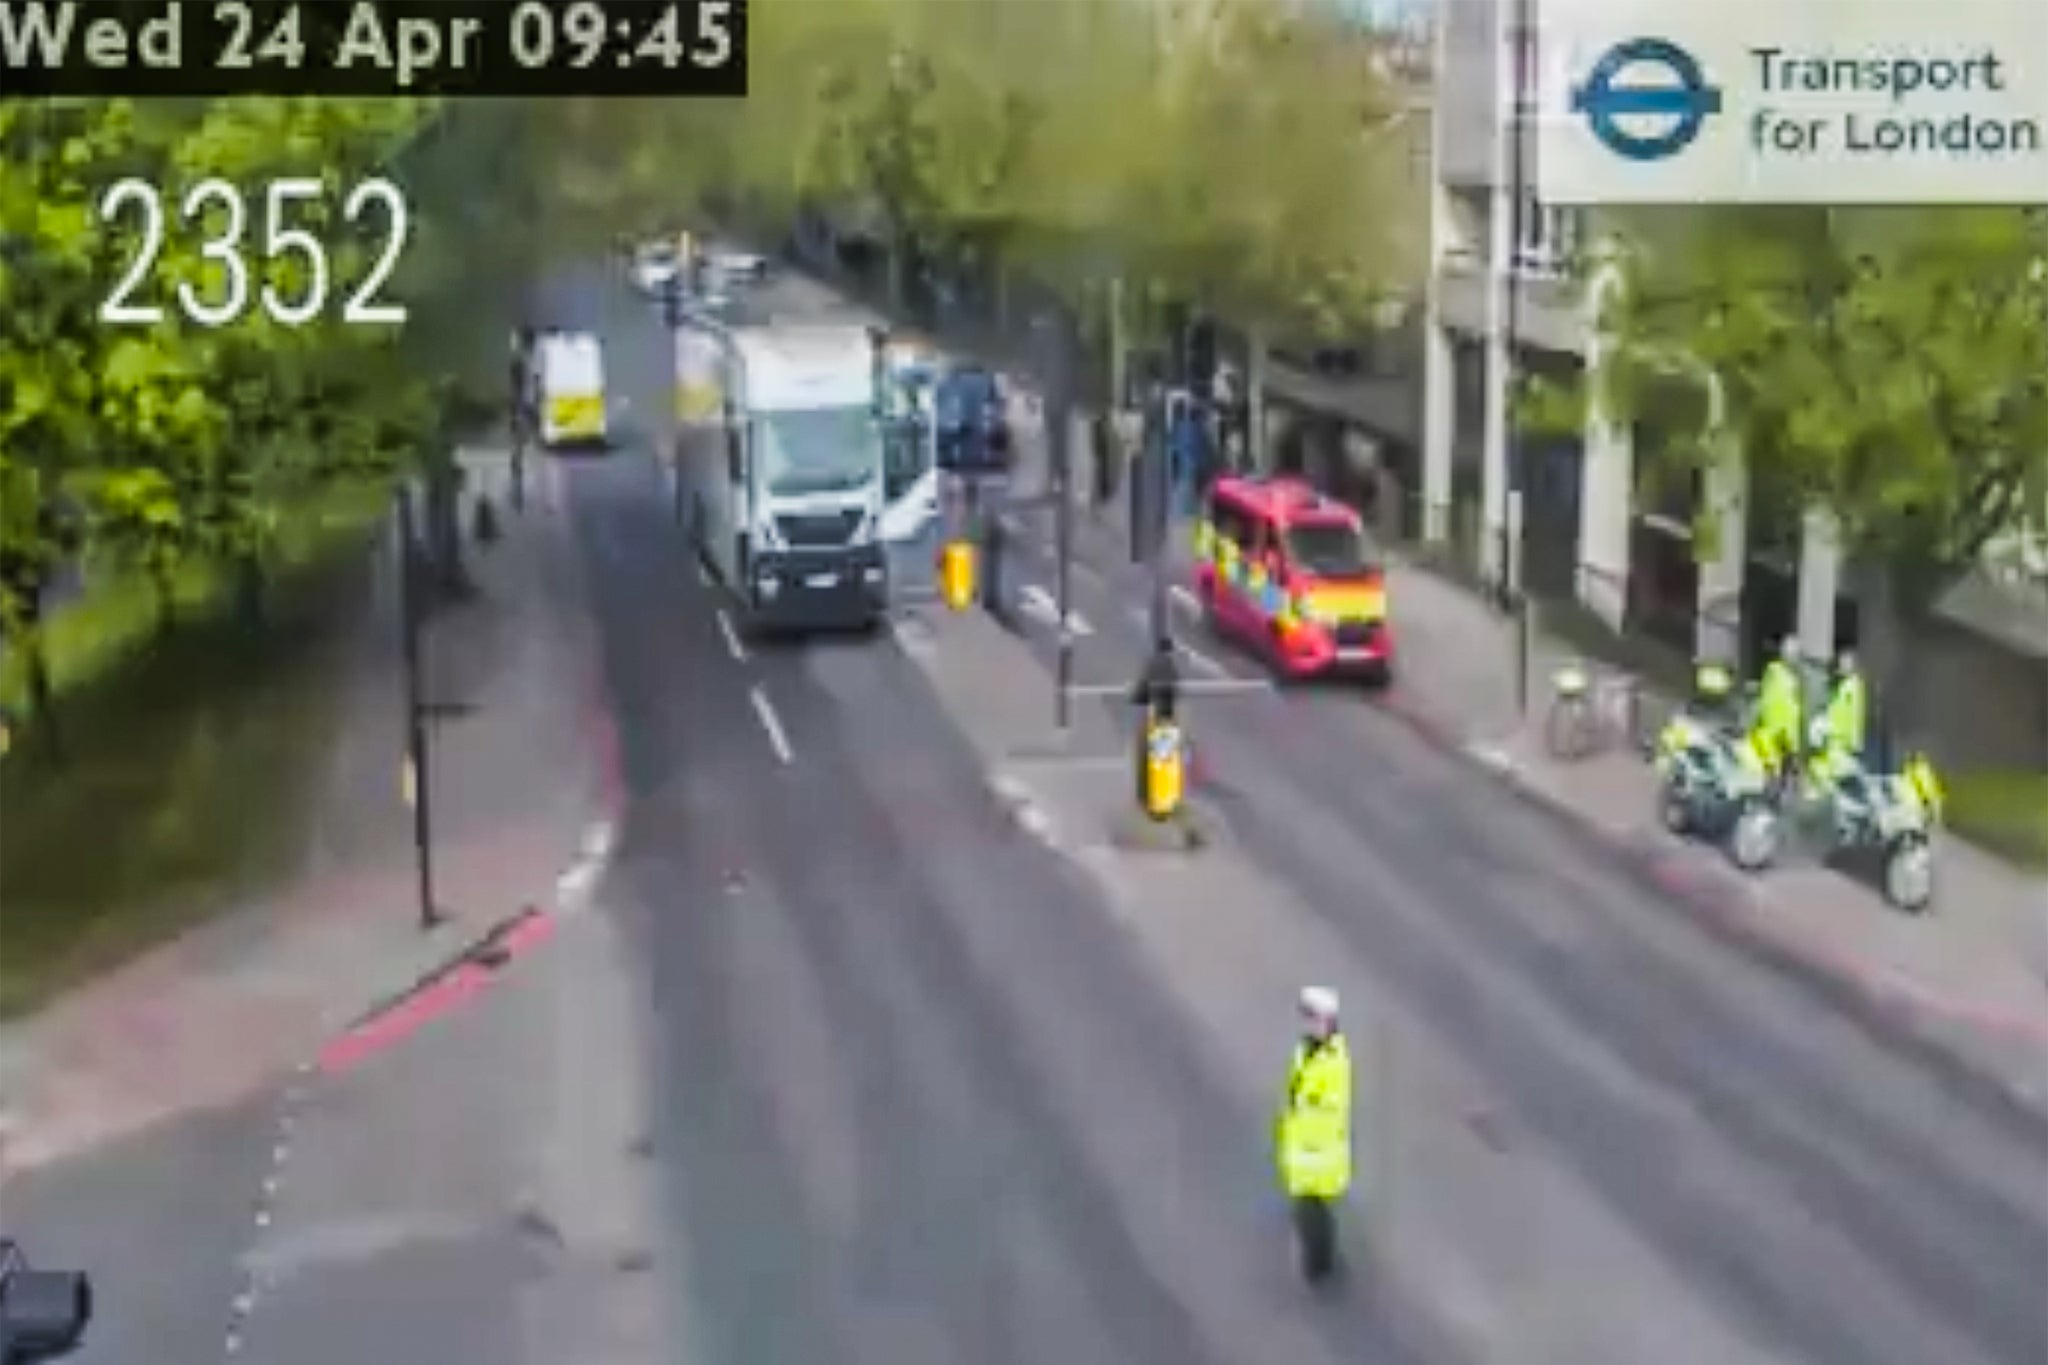 Live traffic cam on The Highway, E1, King David Lane and Glamis Road, shows horse lorry and police at scene